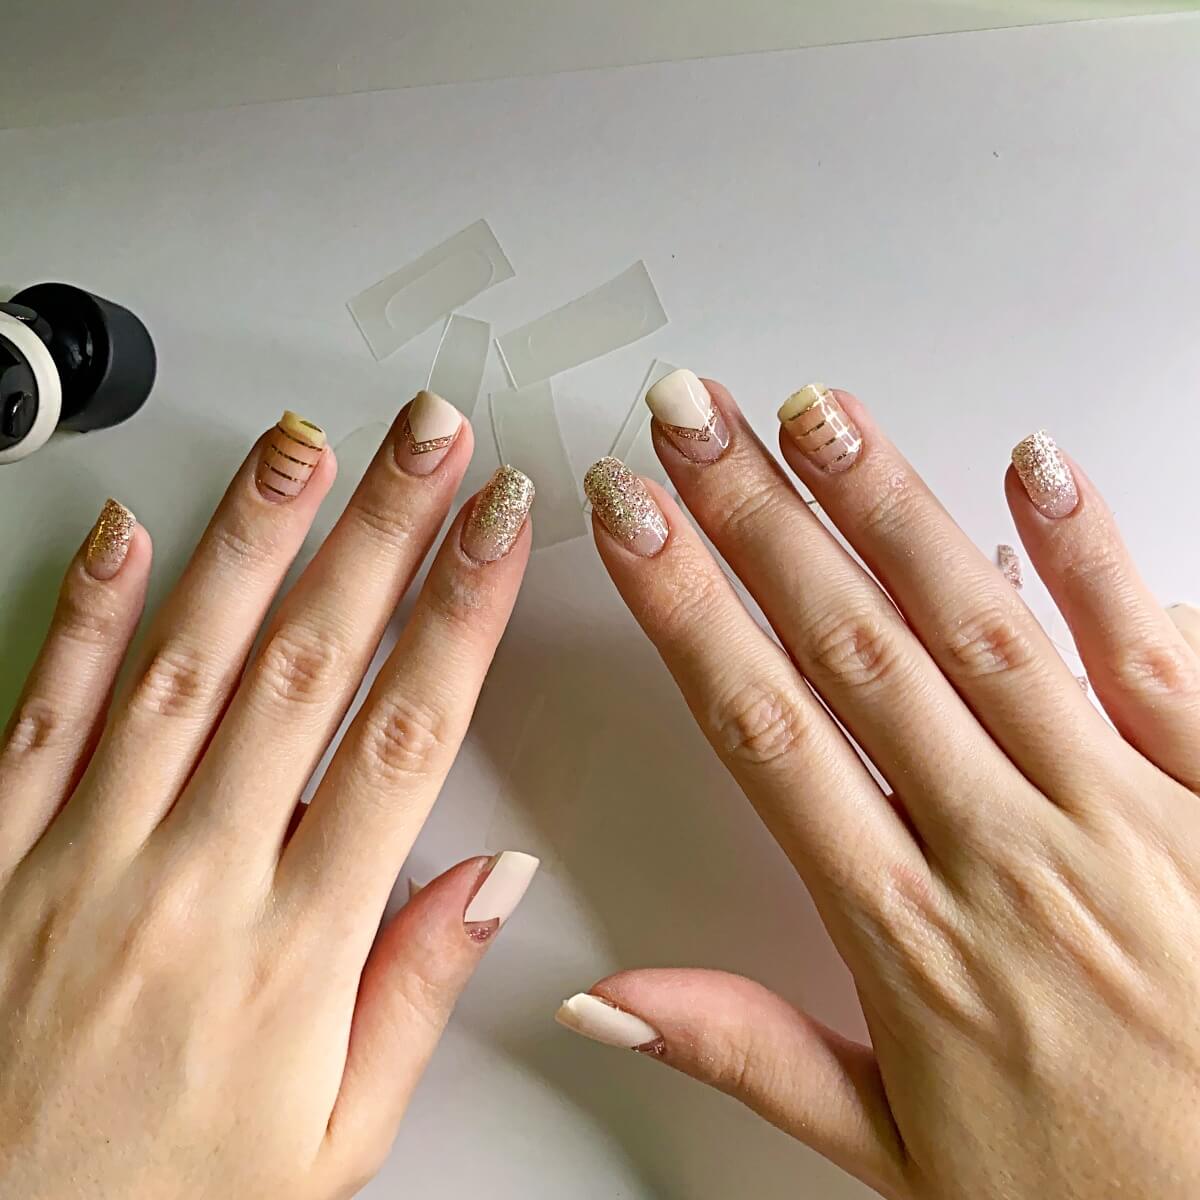 dashing diva strips applied to all nails